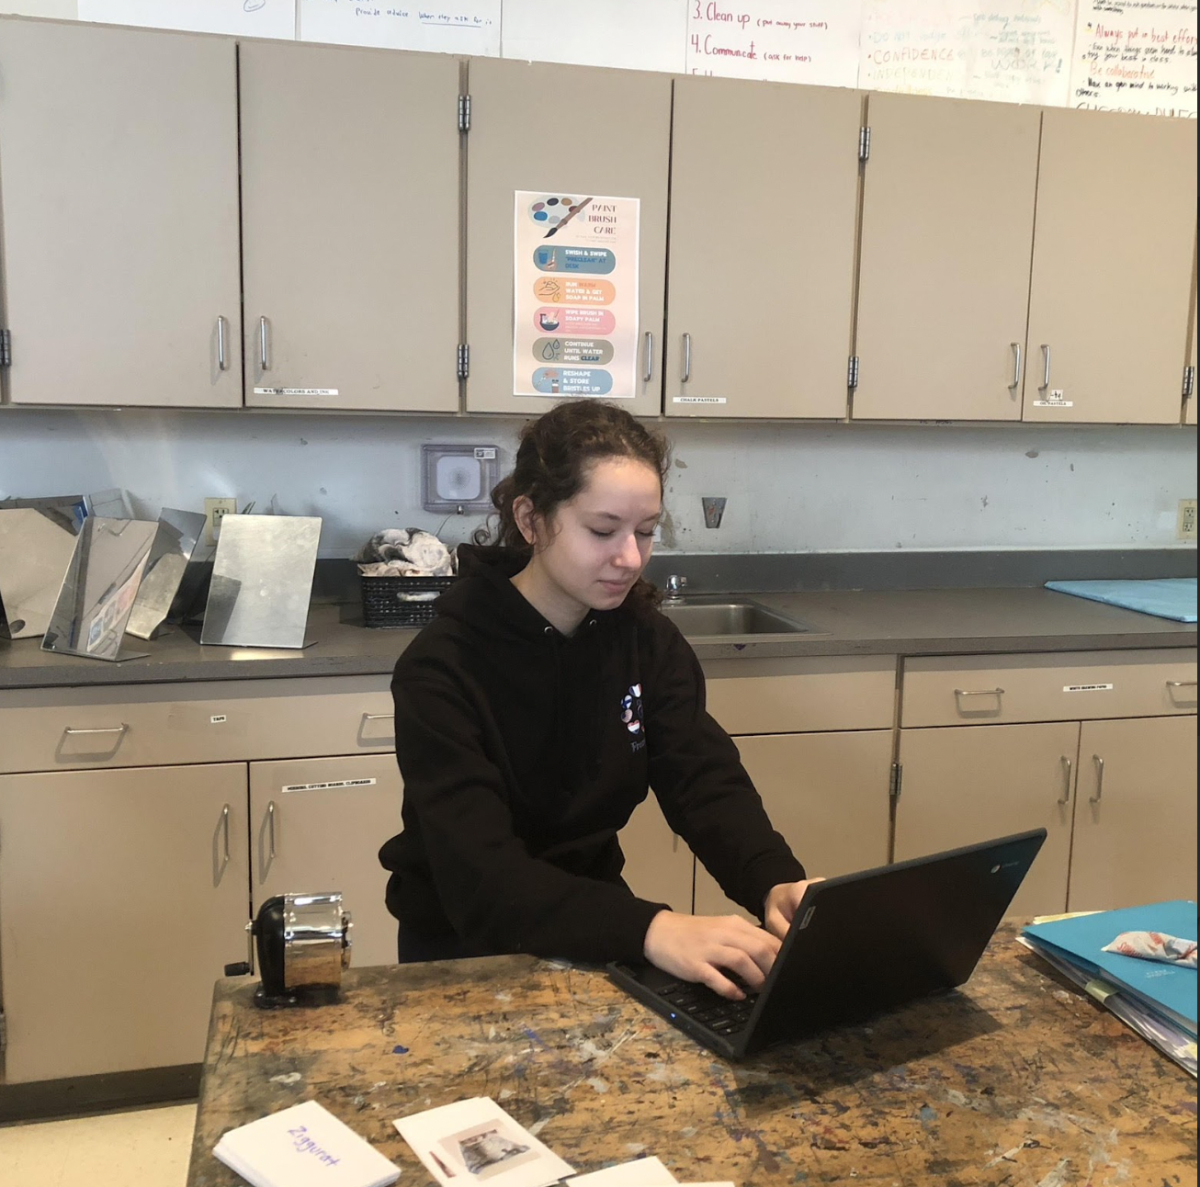 WCHS+junior+Emilia+Desiderioscioli+uses+her+school+provided+chromebook+to+study.+This+year%2C+WCHS+students+must+only+use+school-provided+chromebooks+while+at+school%2C+this+has+both+positive+and+negative+consequences.